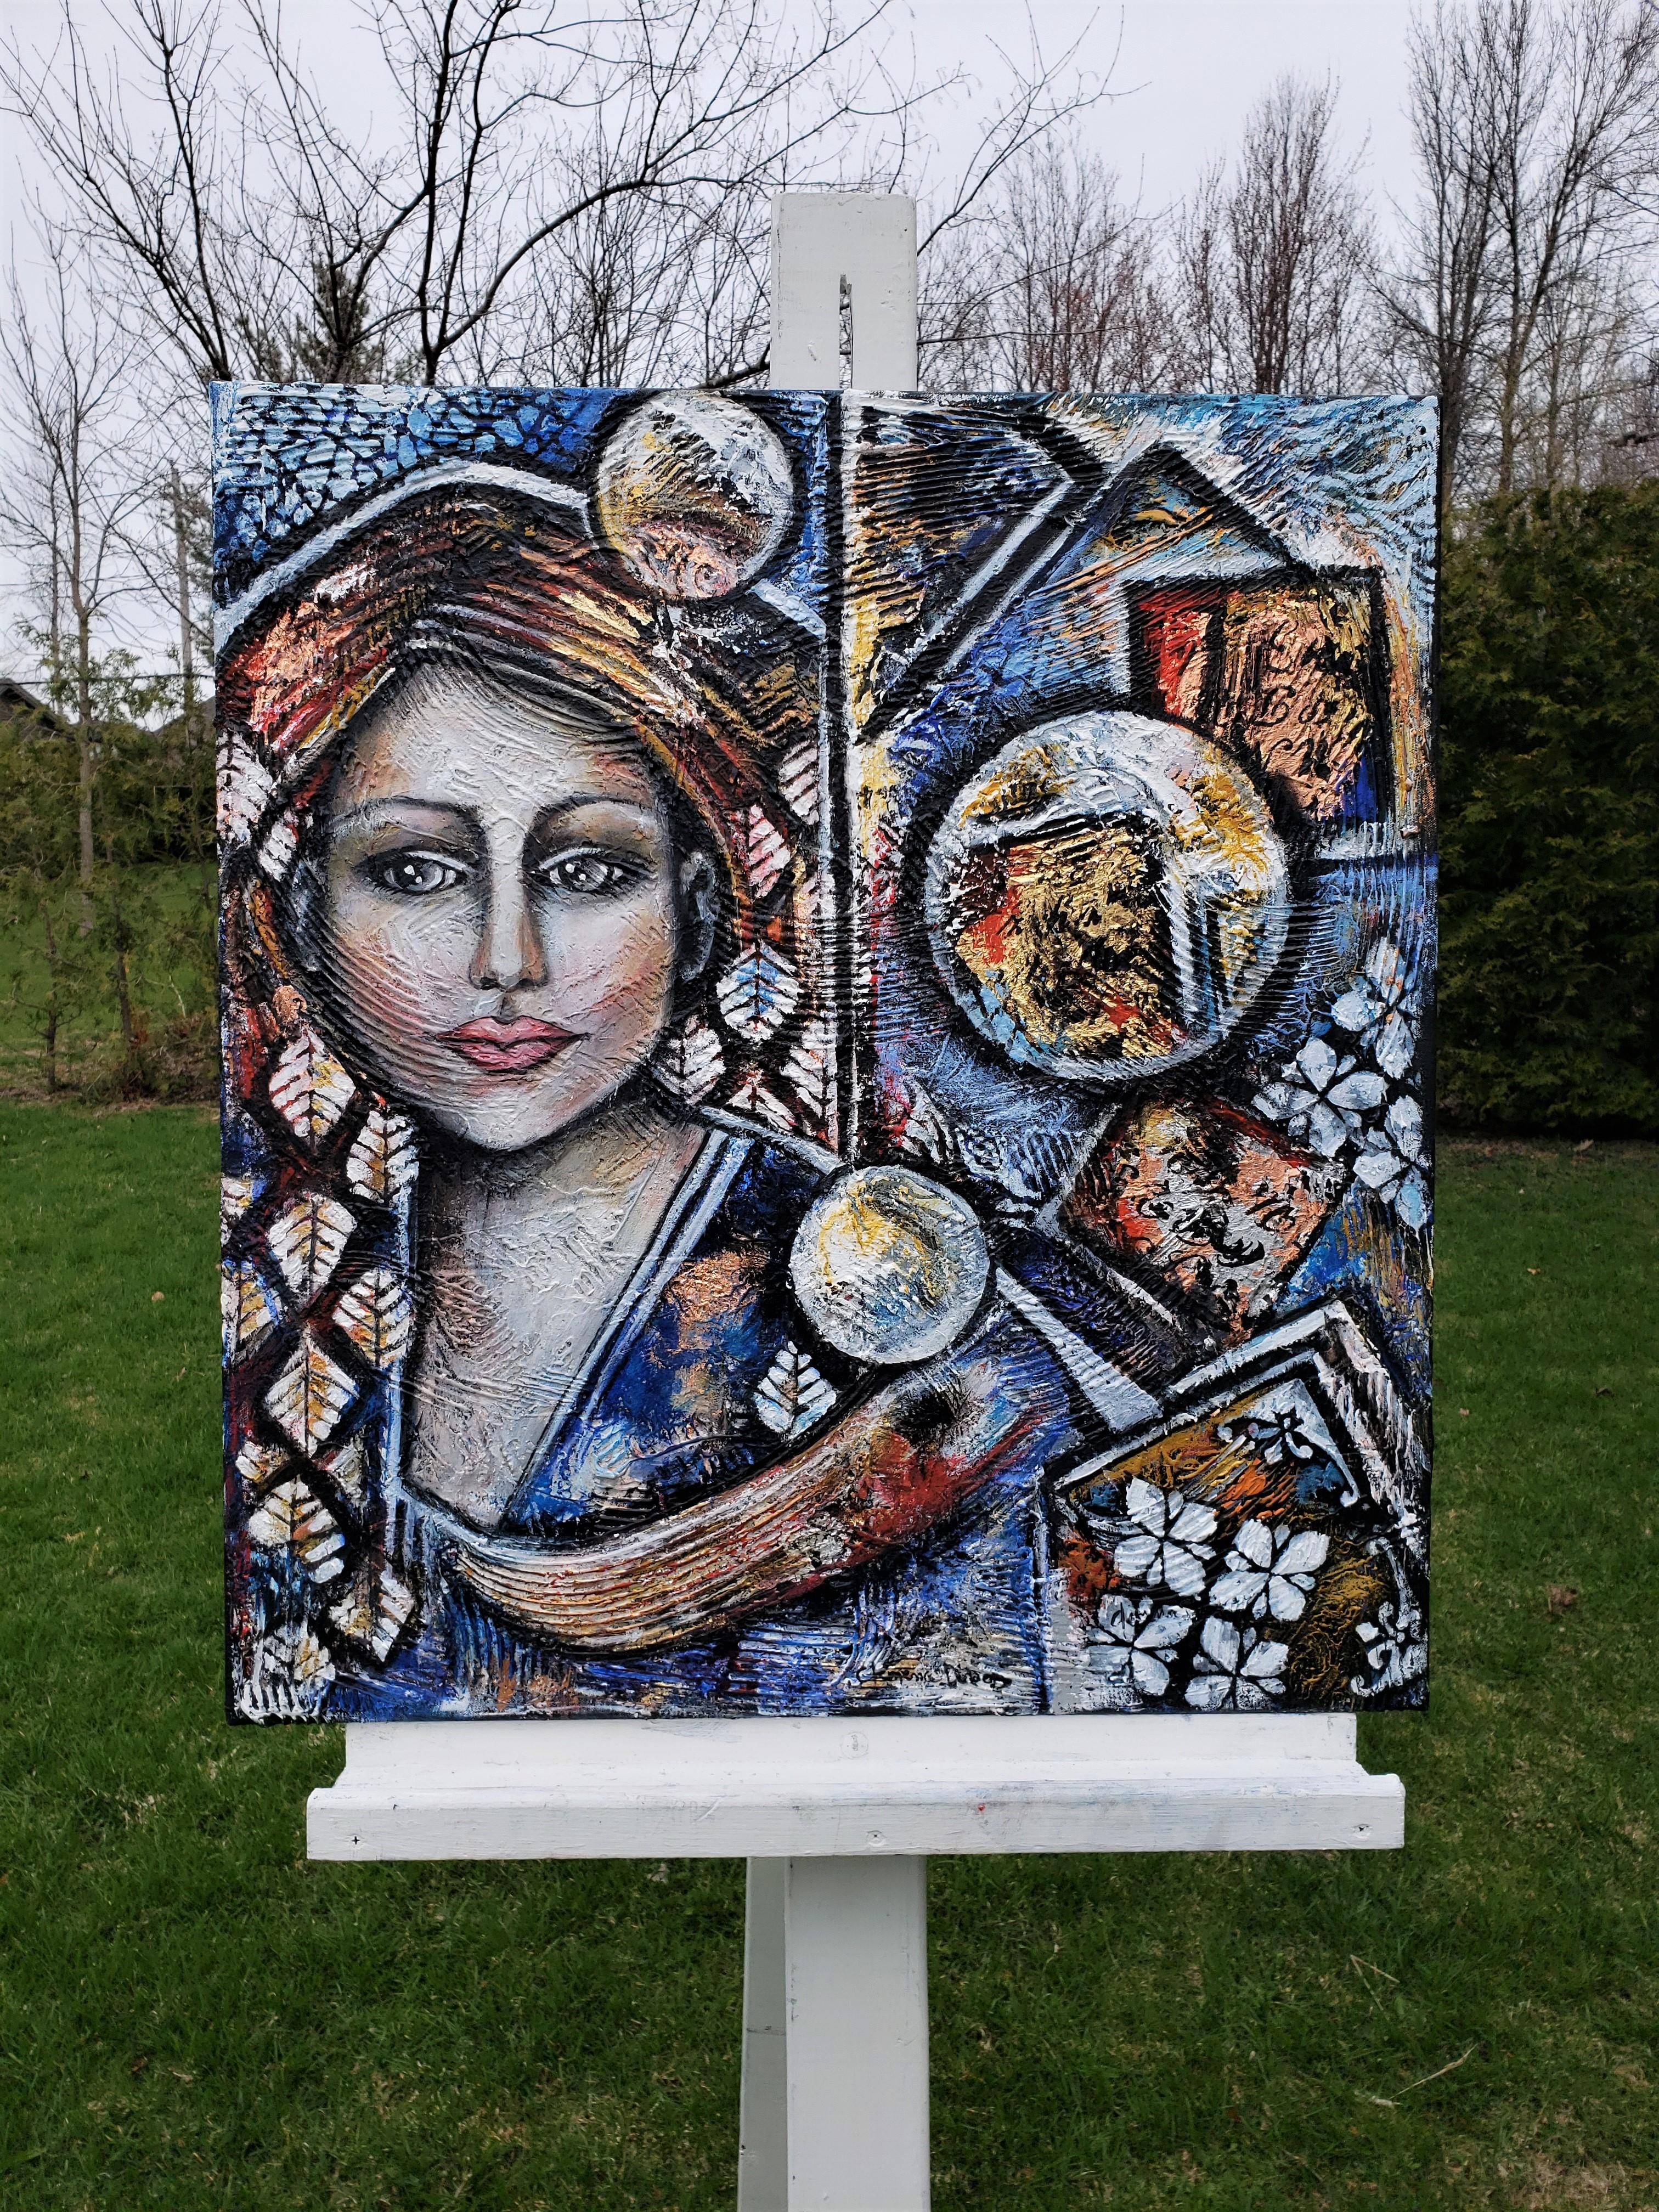 <p>Artist Comments<br />Through this painting, discover your own path, says Clemence. The questions are answered in the eyes of the character. To create the piece, Clemence textured the canvas and painted in acrylic with metallized foil inserts. The